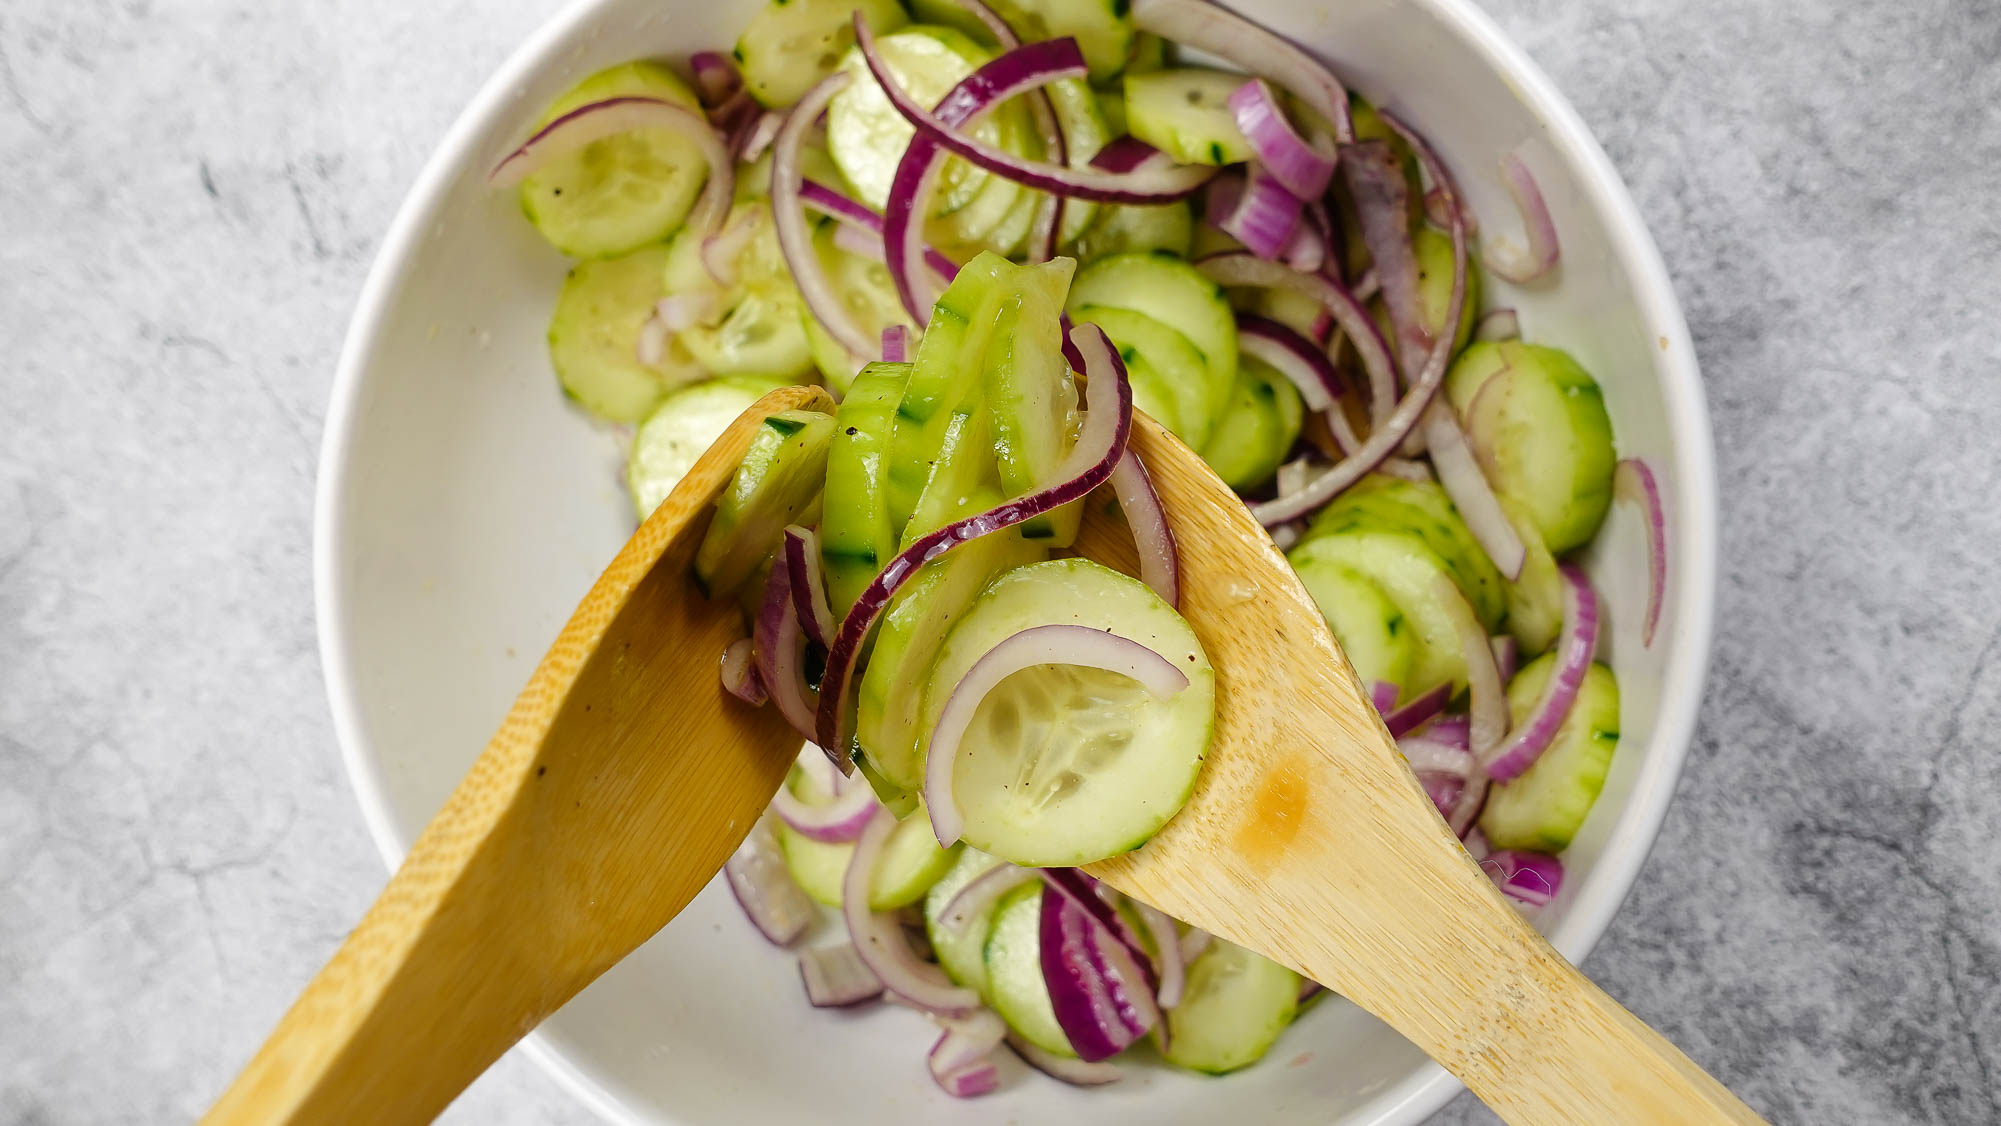 Cucumber Red Onion Salad Recipe in a big white bowl with a wooden fork and spoon.